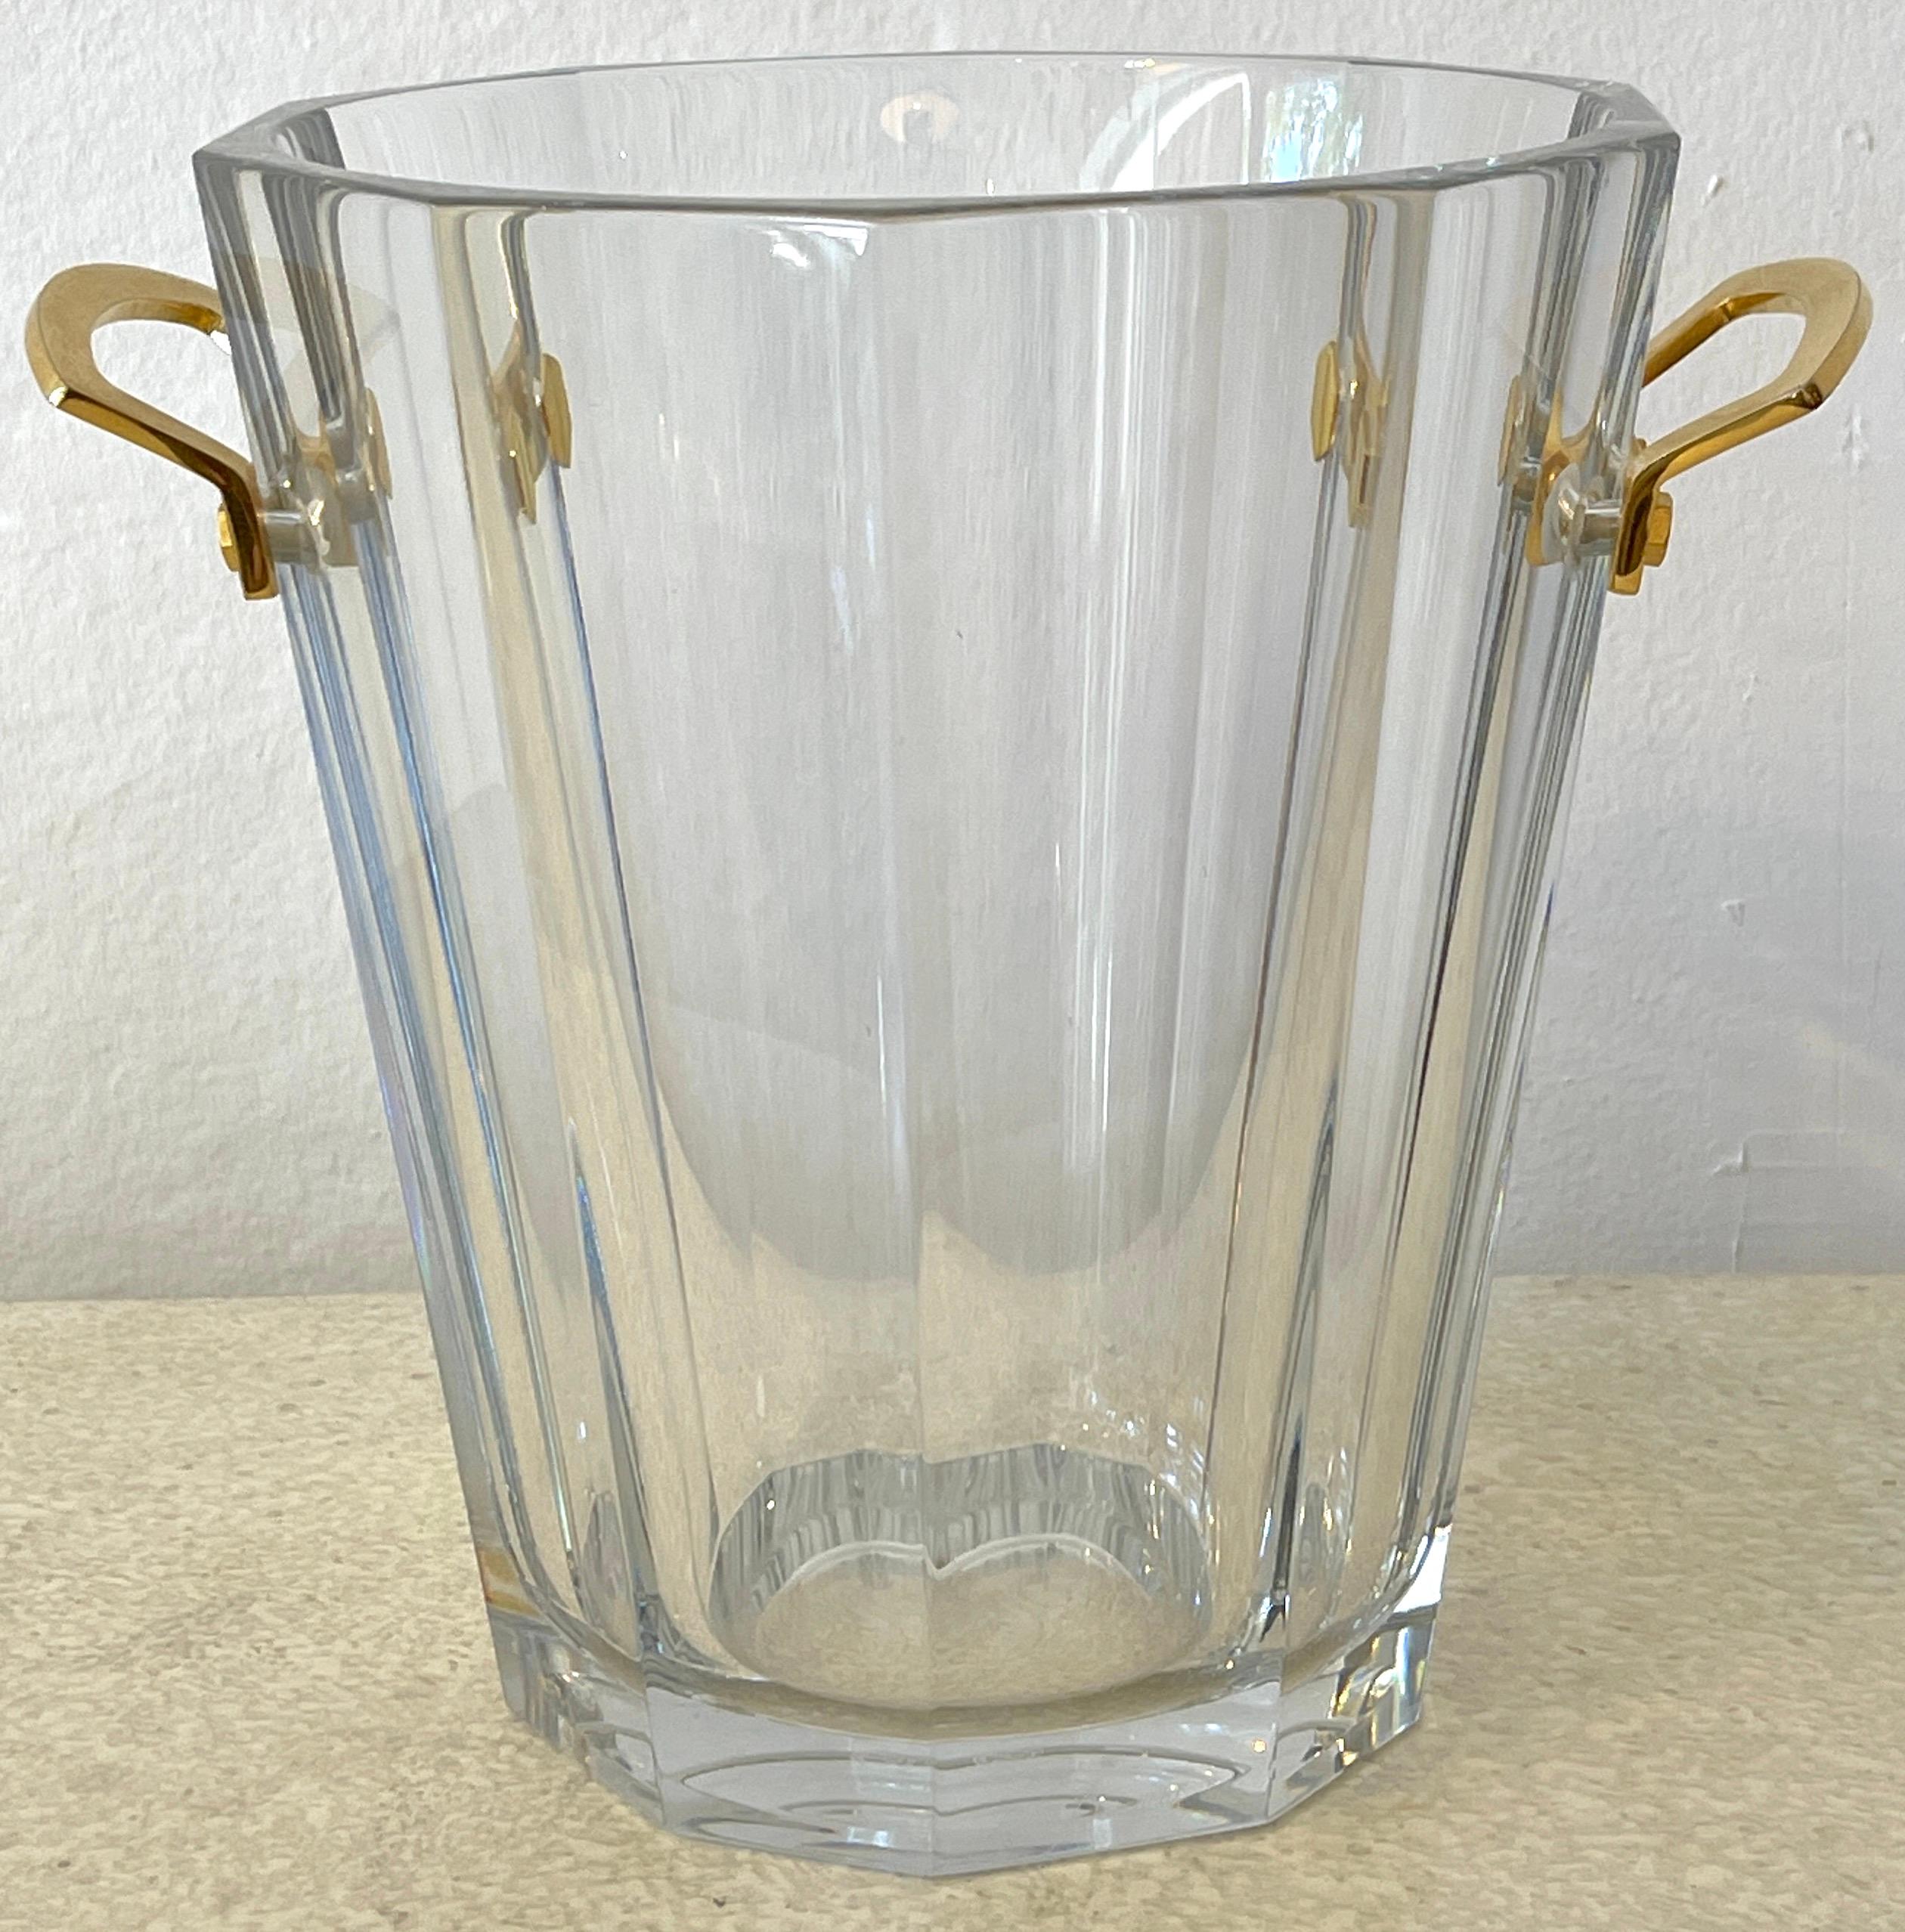 Baccarat crystal & gilt bronze champagne bucket, with continuous cut panel sides fitted with twin gilt bronze handles, one signed 'Baccarat', the crystal is also signed 'Baccarat'. The interior measures 9